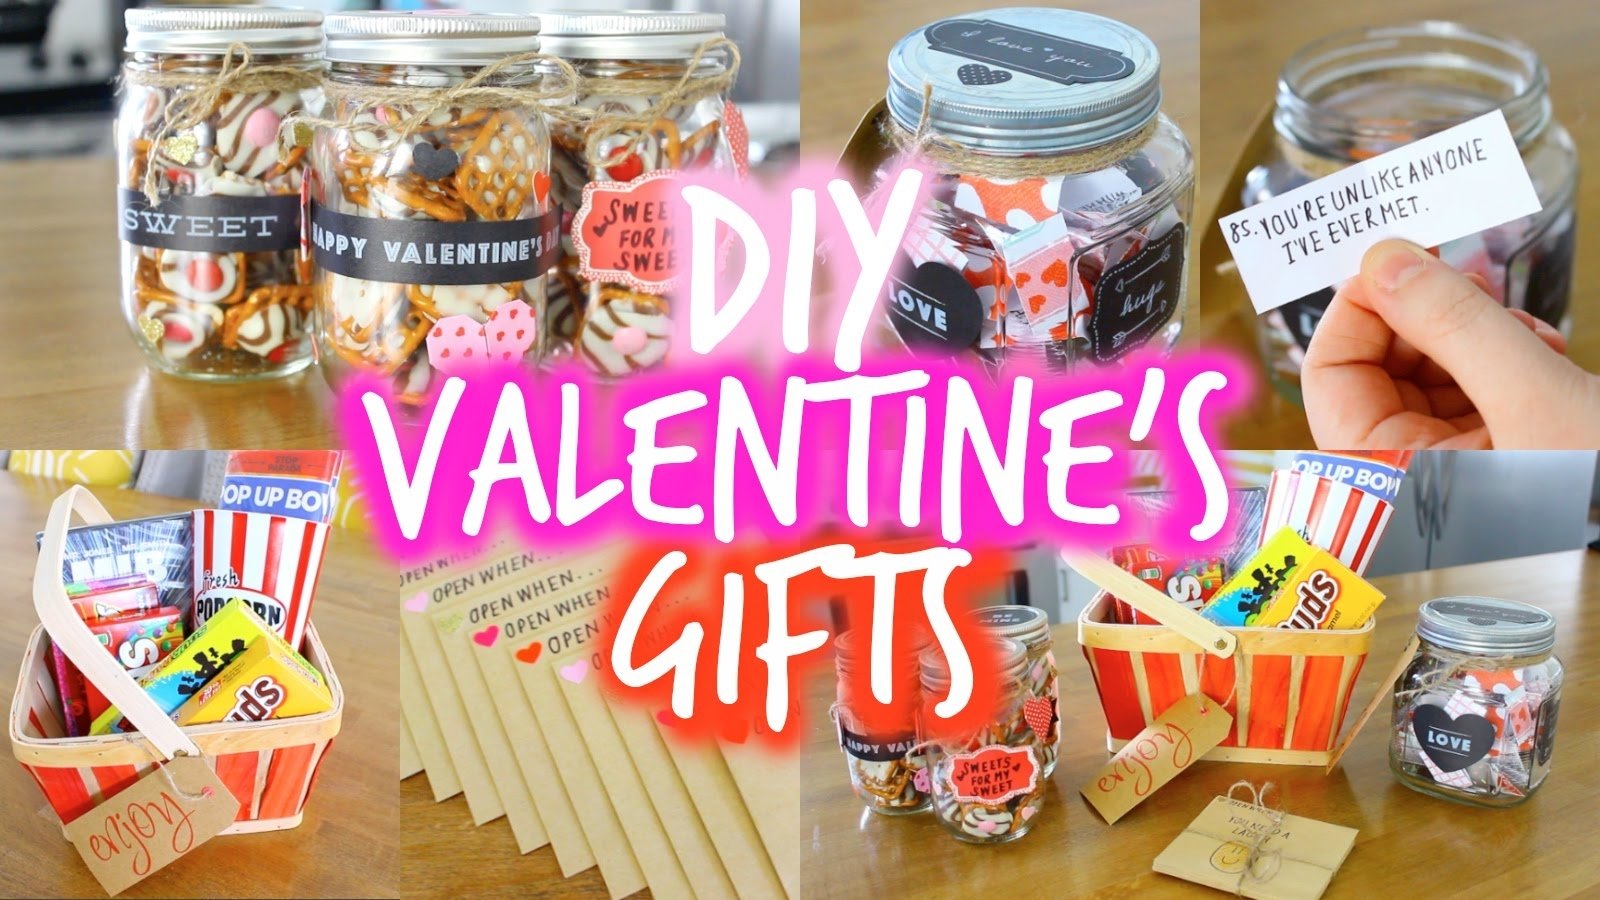 10 Lovable Valentines Gifts Ideas For Him easy diy valentines day gift ideas for your boyfriend youtube 54 2022